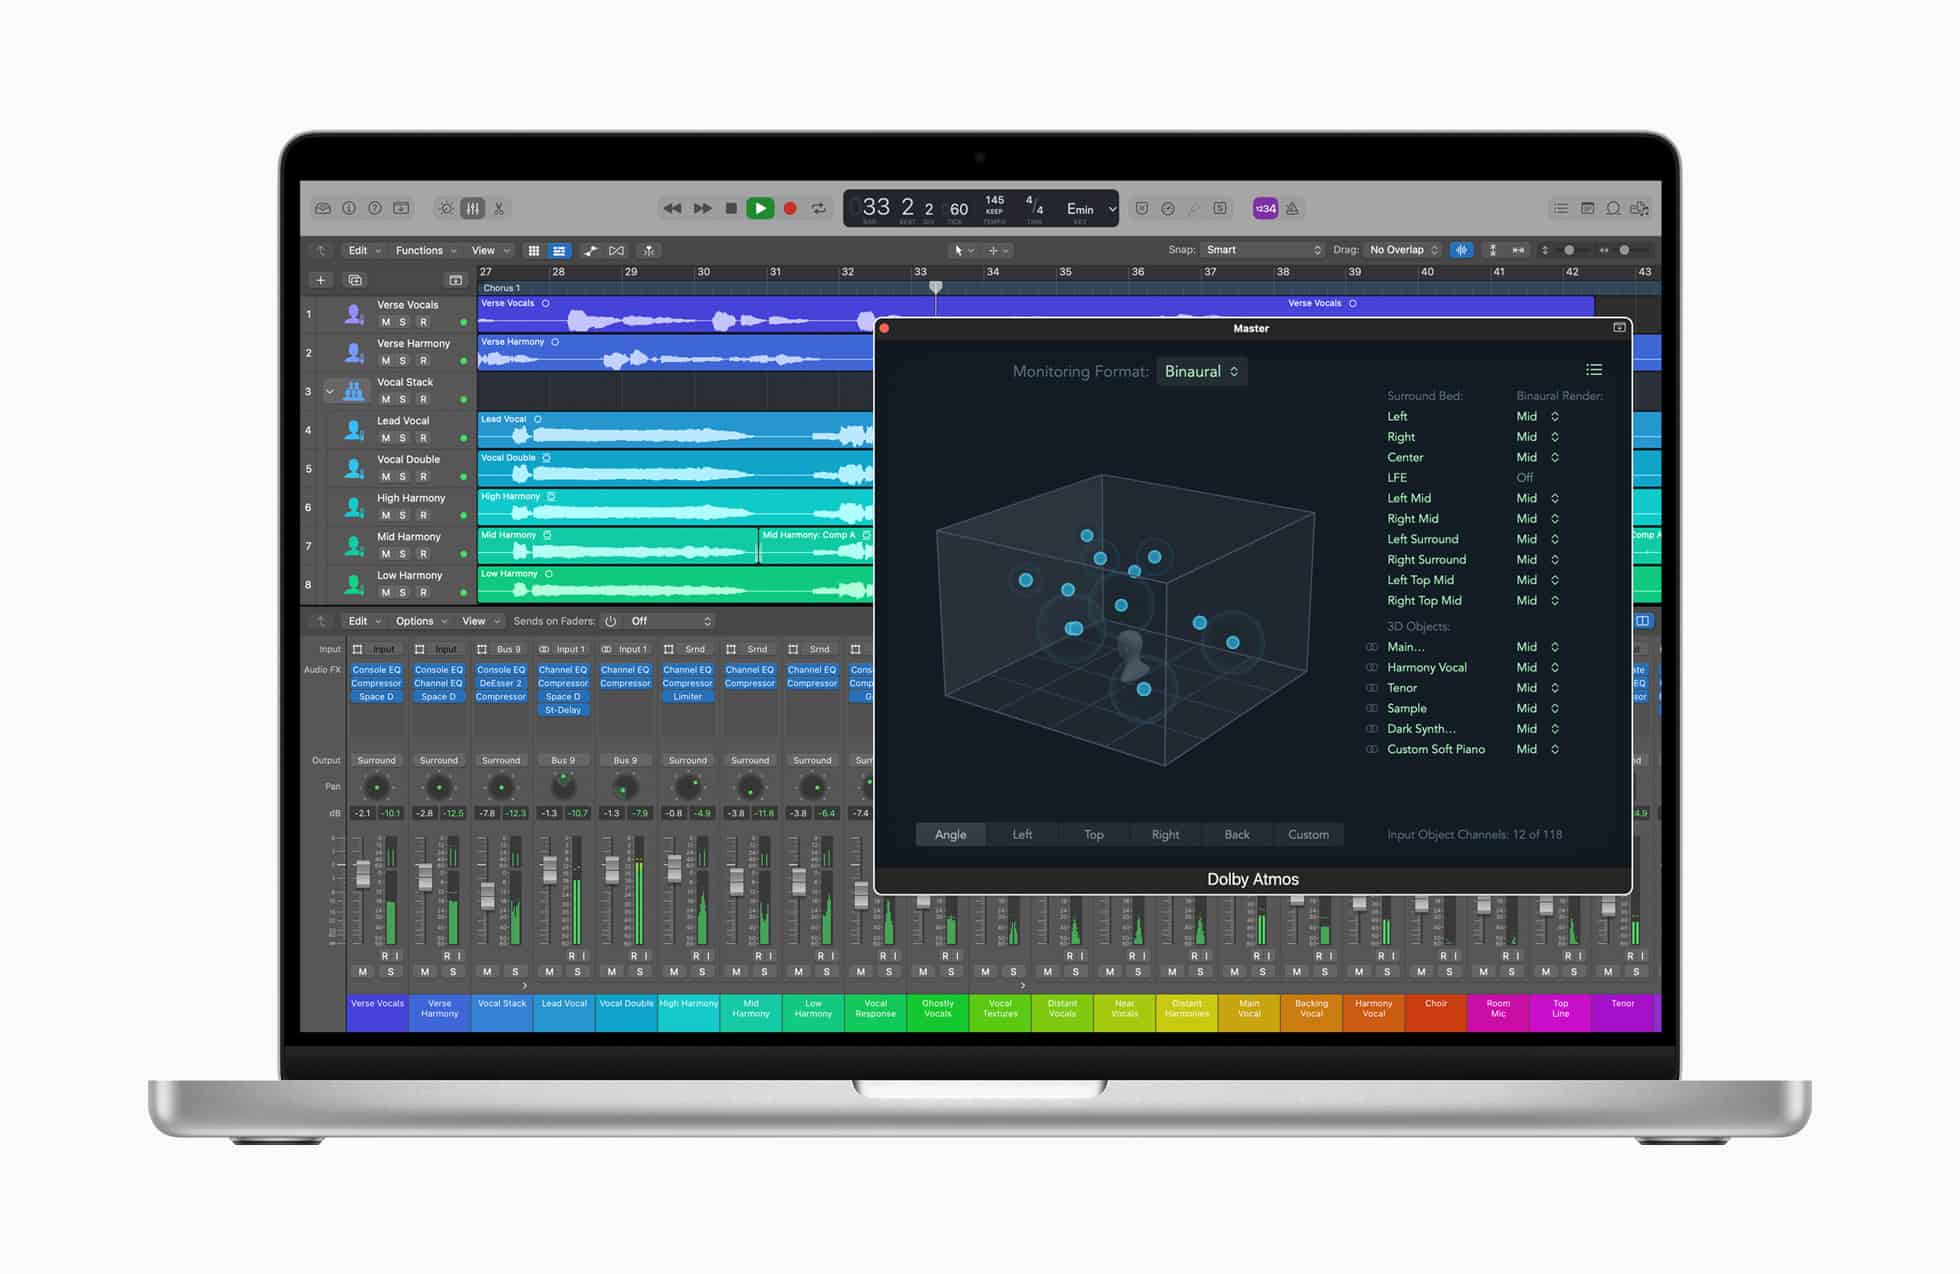 Logic Pro- Dolby Atmos and Spatial Audio now built into Logic Pro